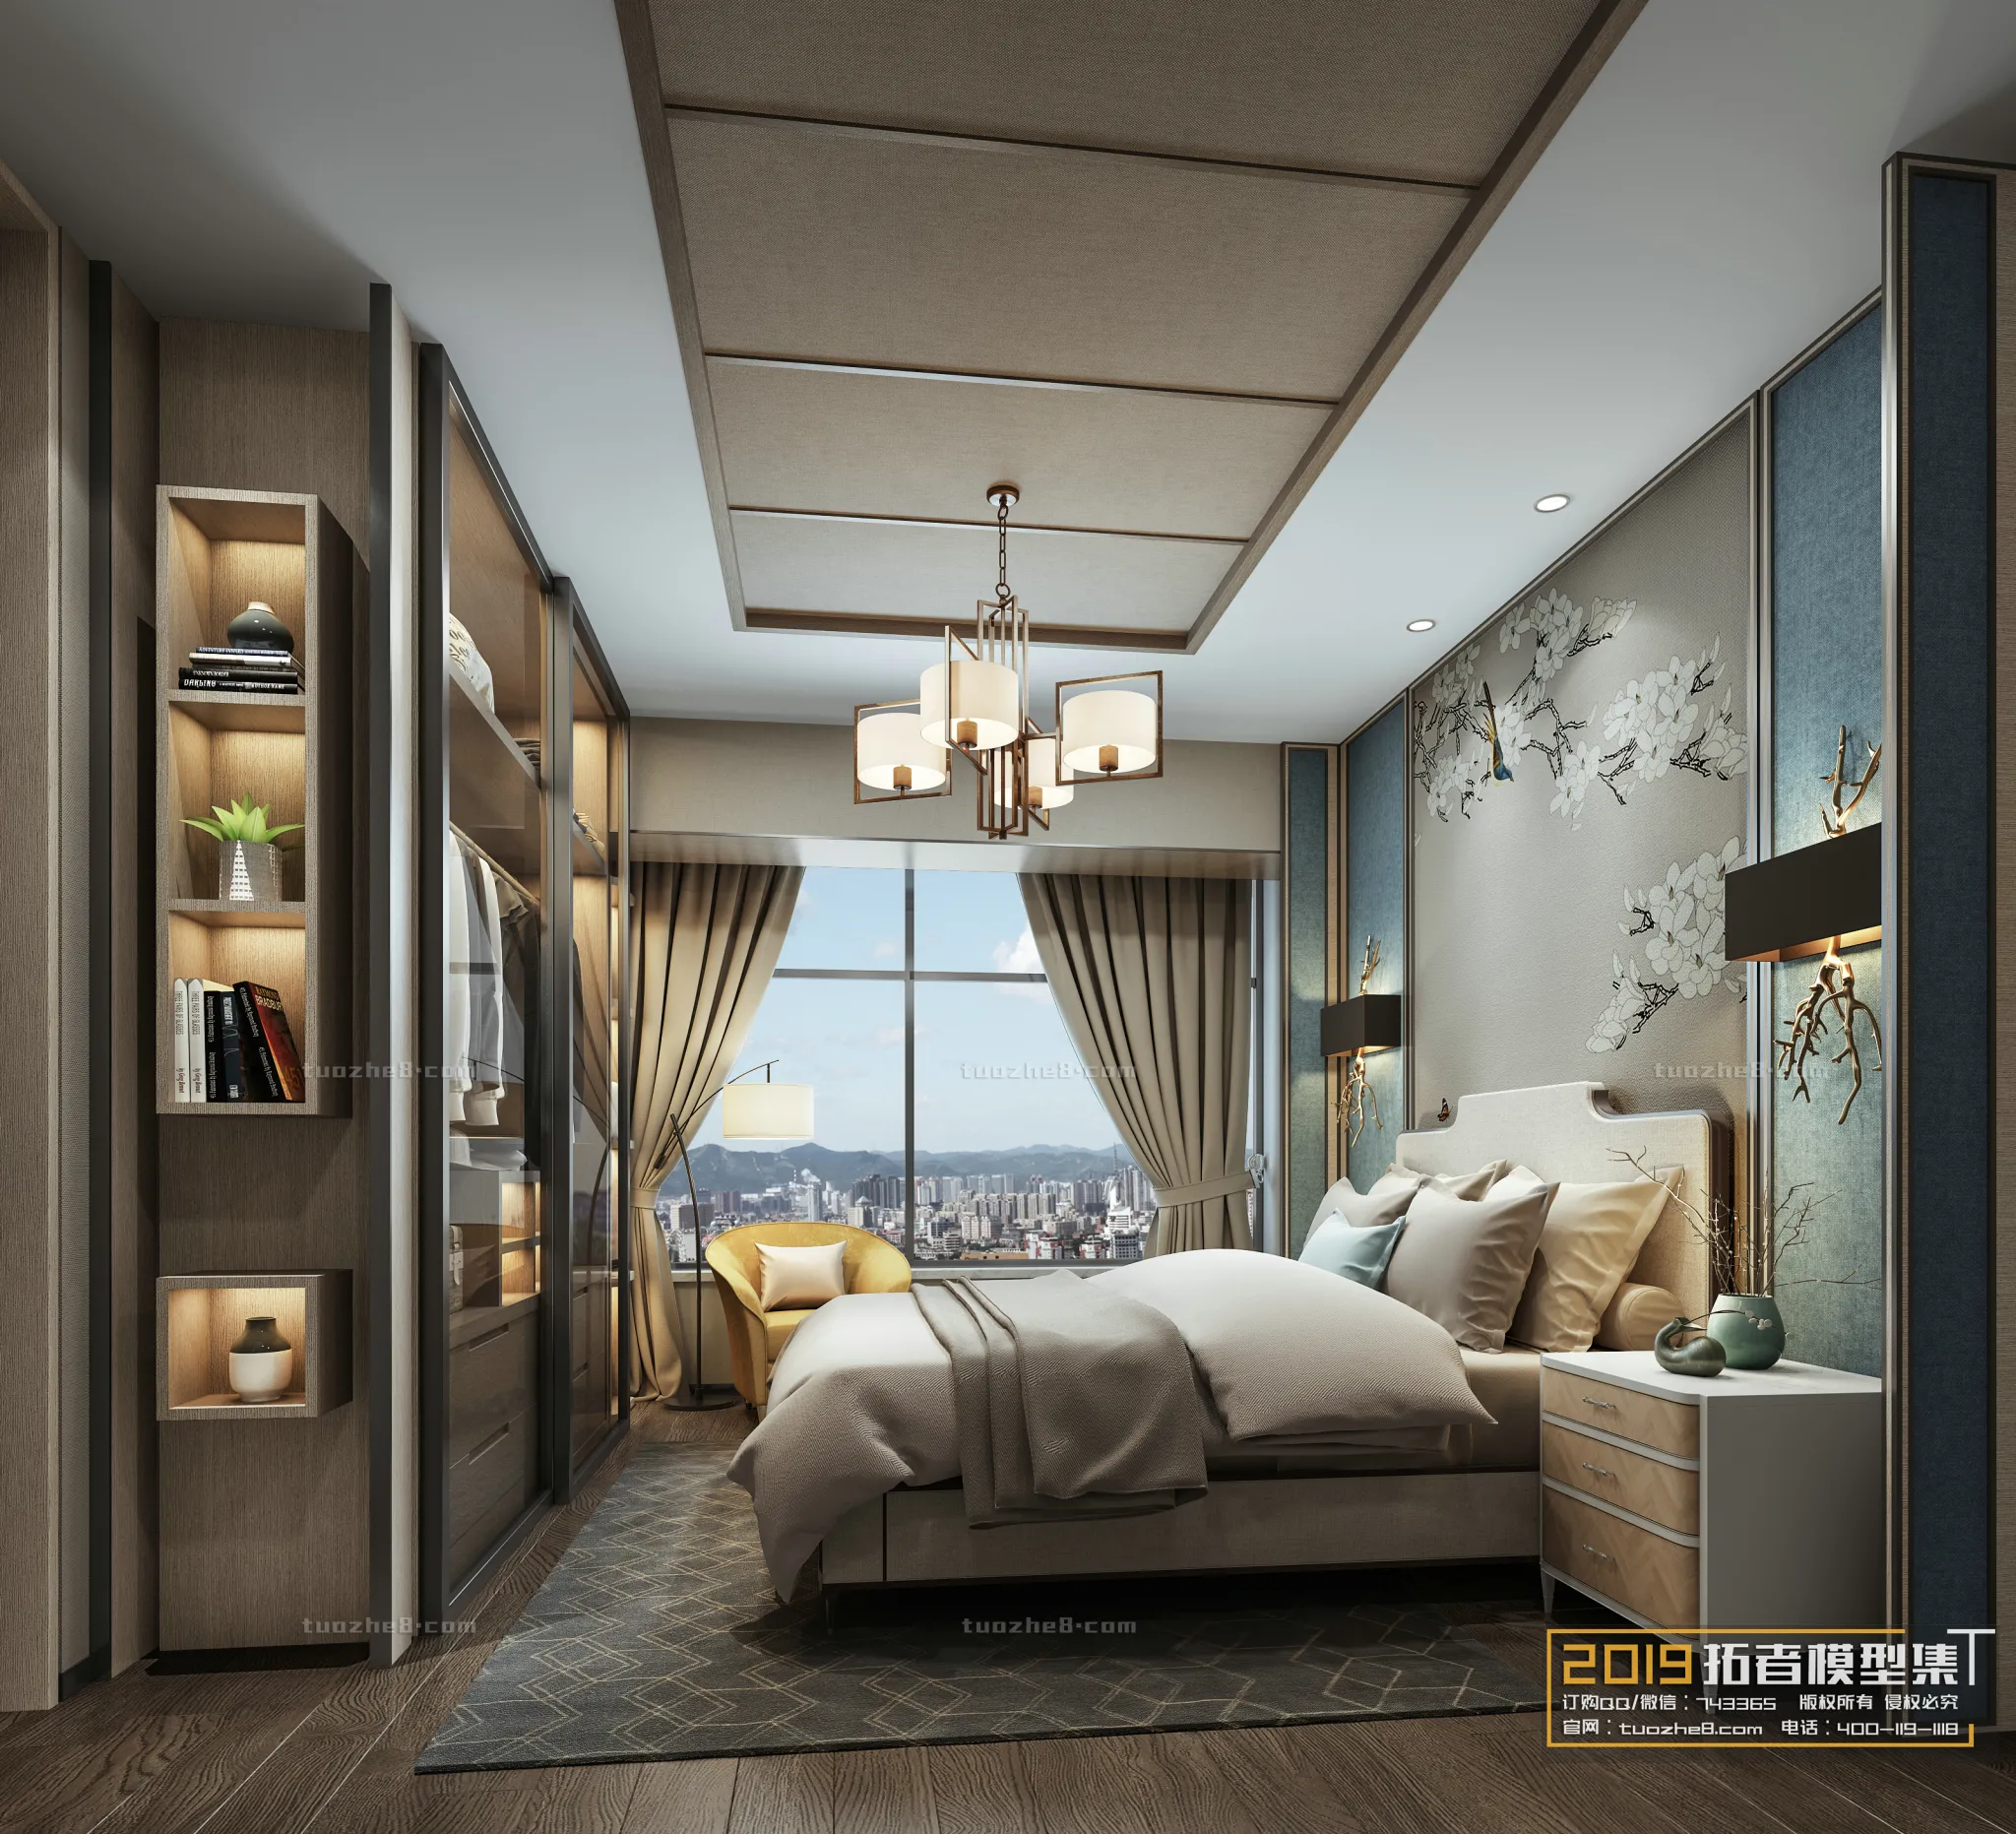 Extension Interior – BEDROOM – CHINESE STYLES – 012